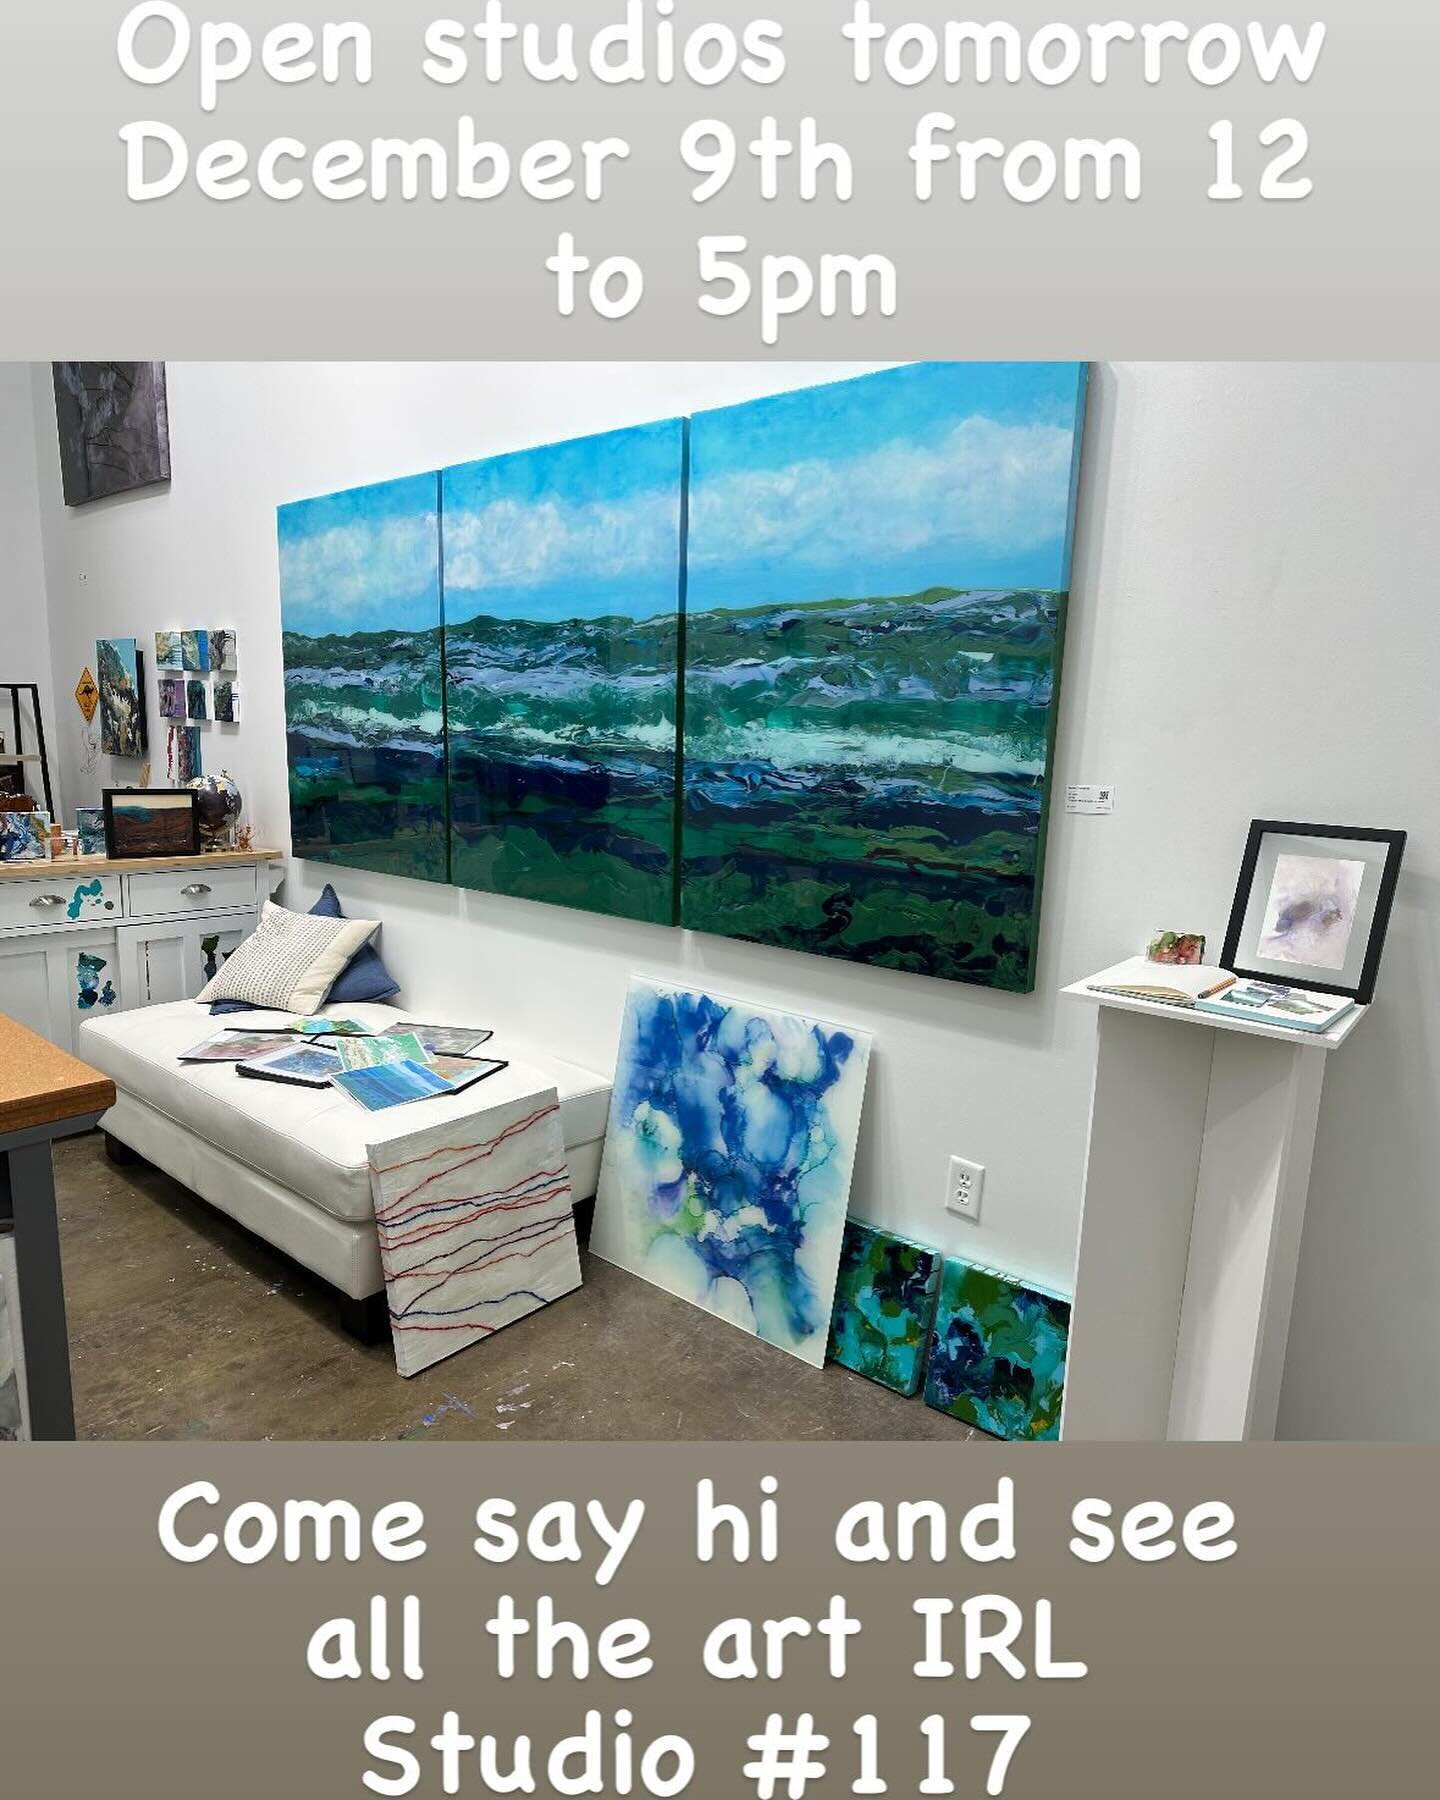 Last Second Saturday open studios for 2023! Silver Street has a new exhibition of artist work on the walls and everyone is in a holiday mood so come visit us and see what we&rsquo;ve all been creating! I&rsquo;ll be in studio #117!